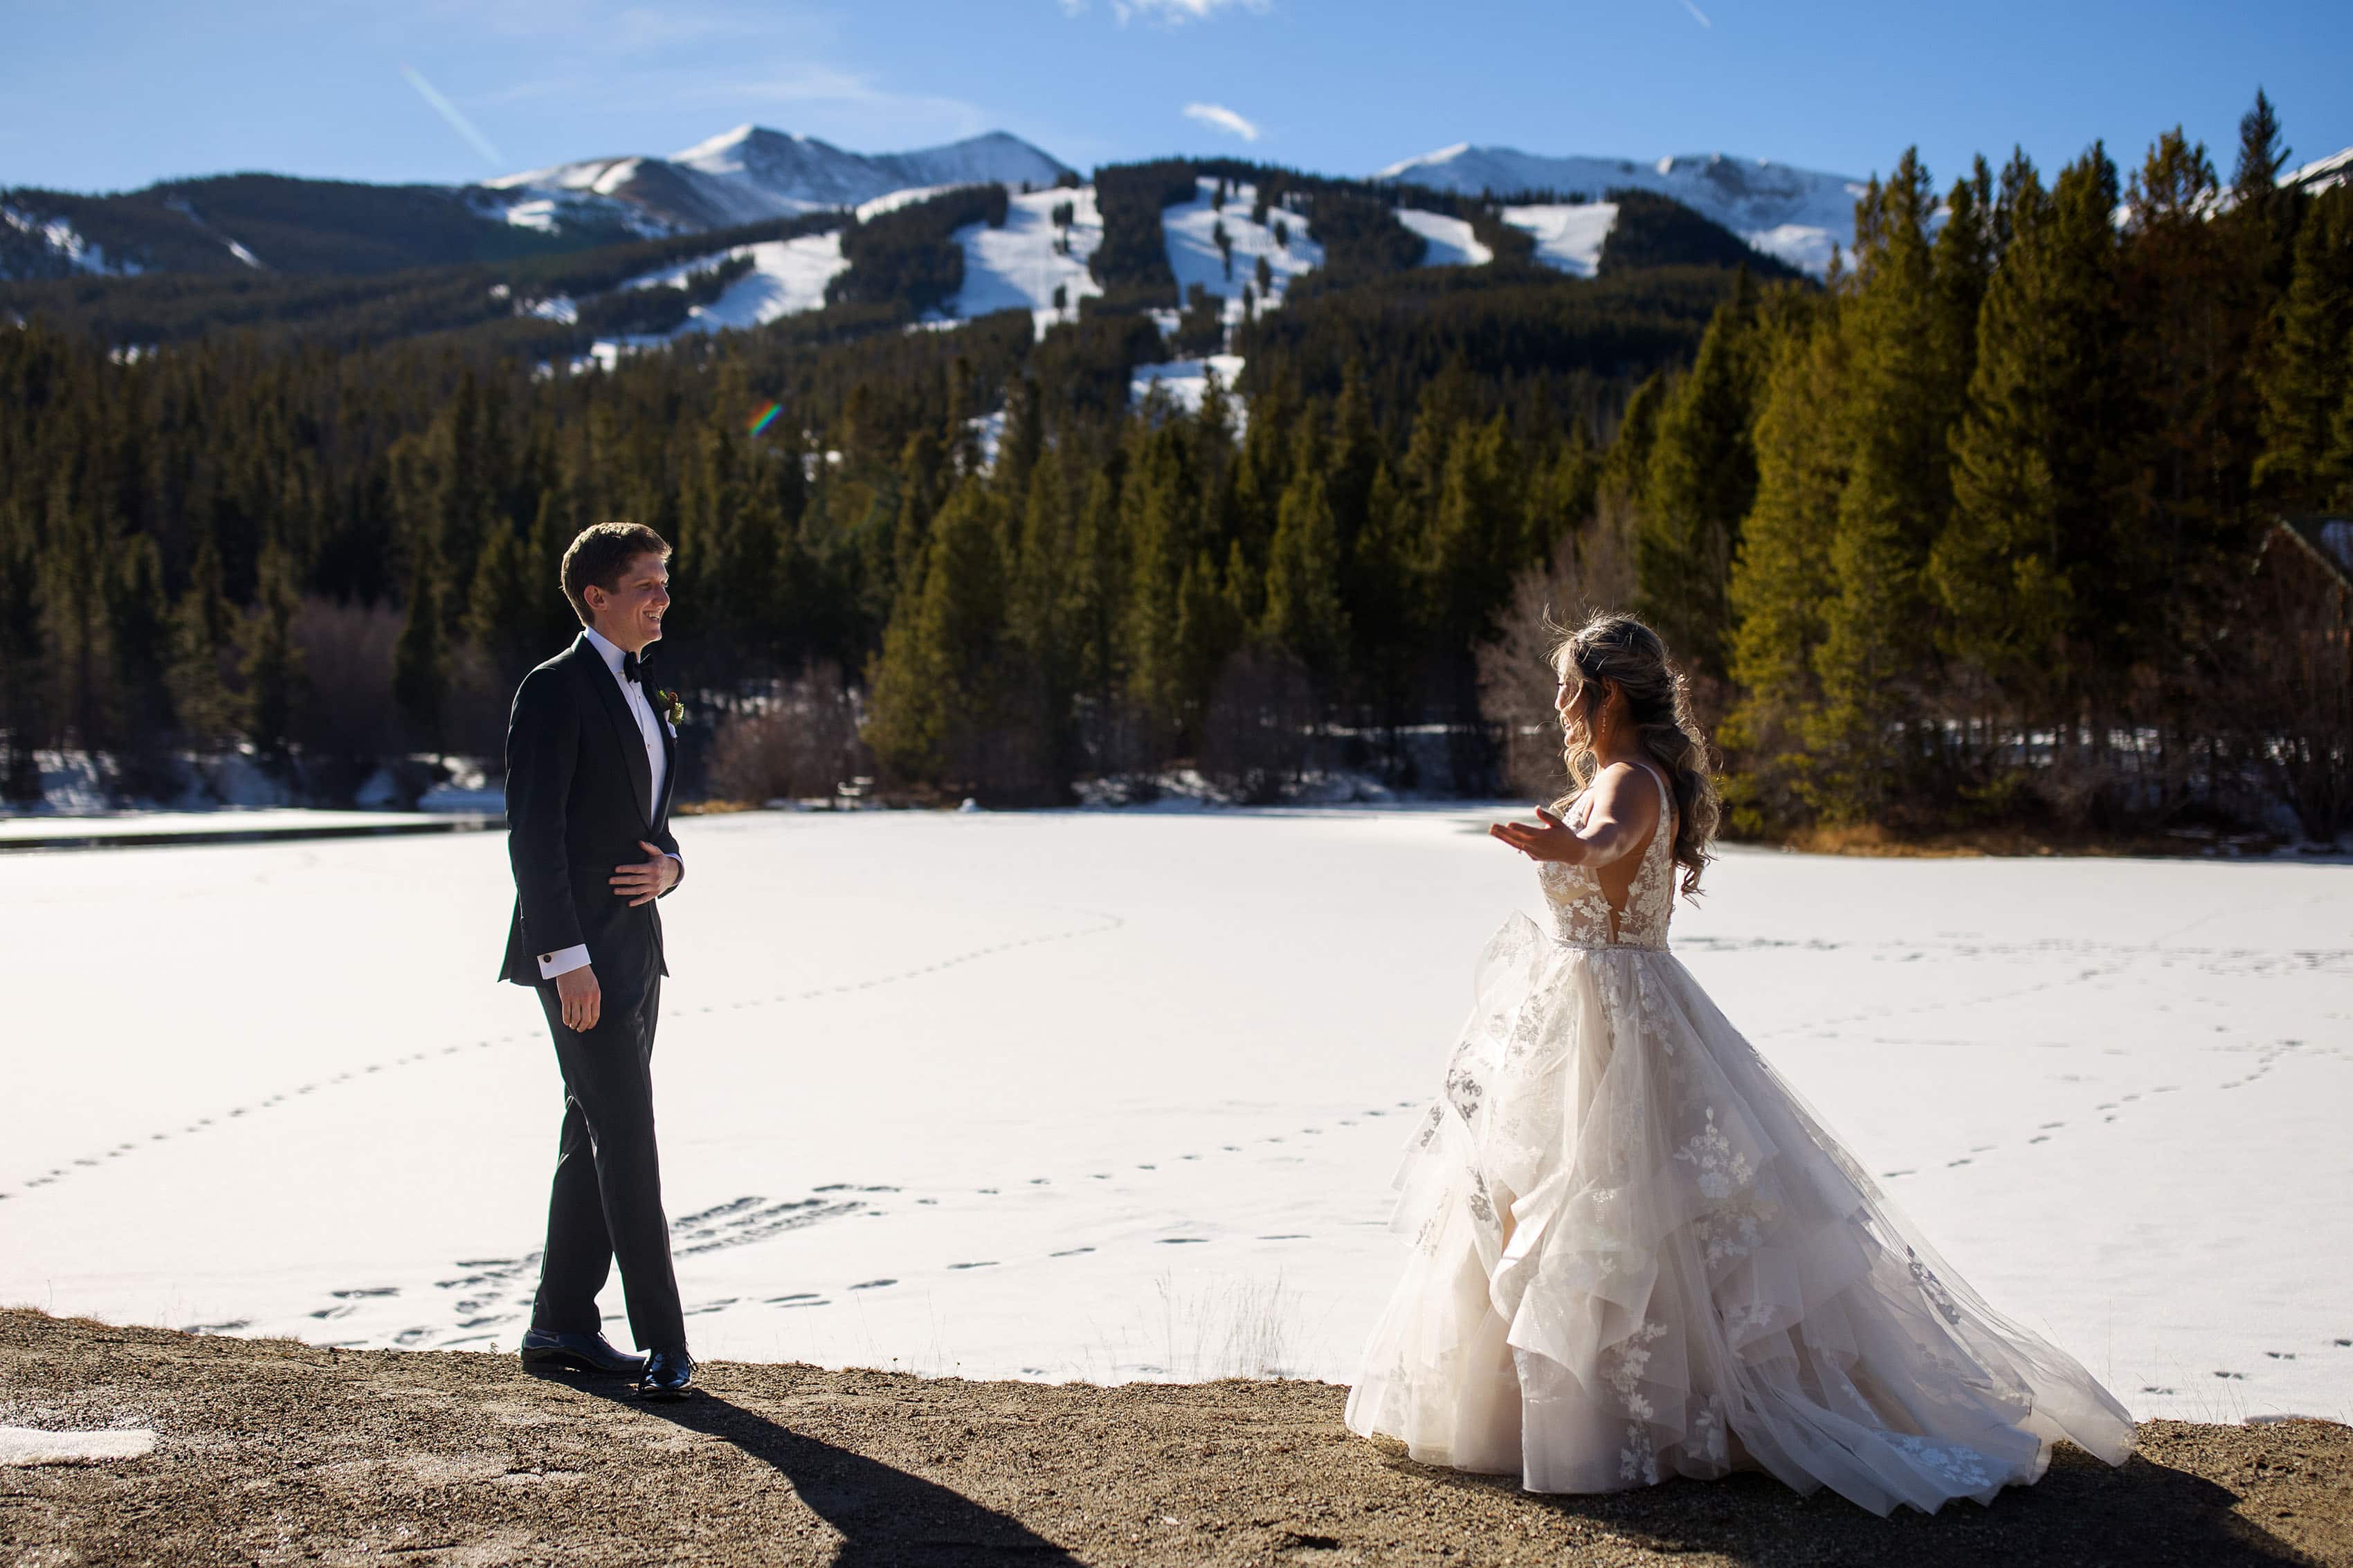 Chris and Julia react during their first look at Sawmill Reservoir on their wedding day in Breckenridge